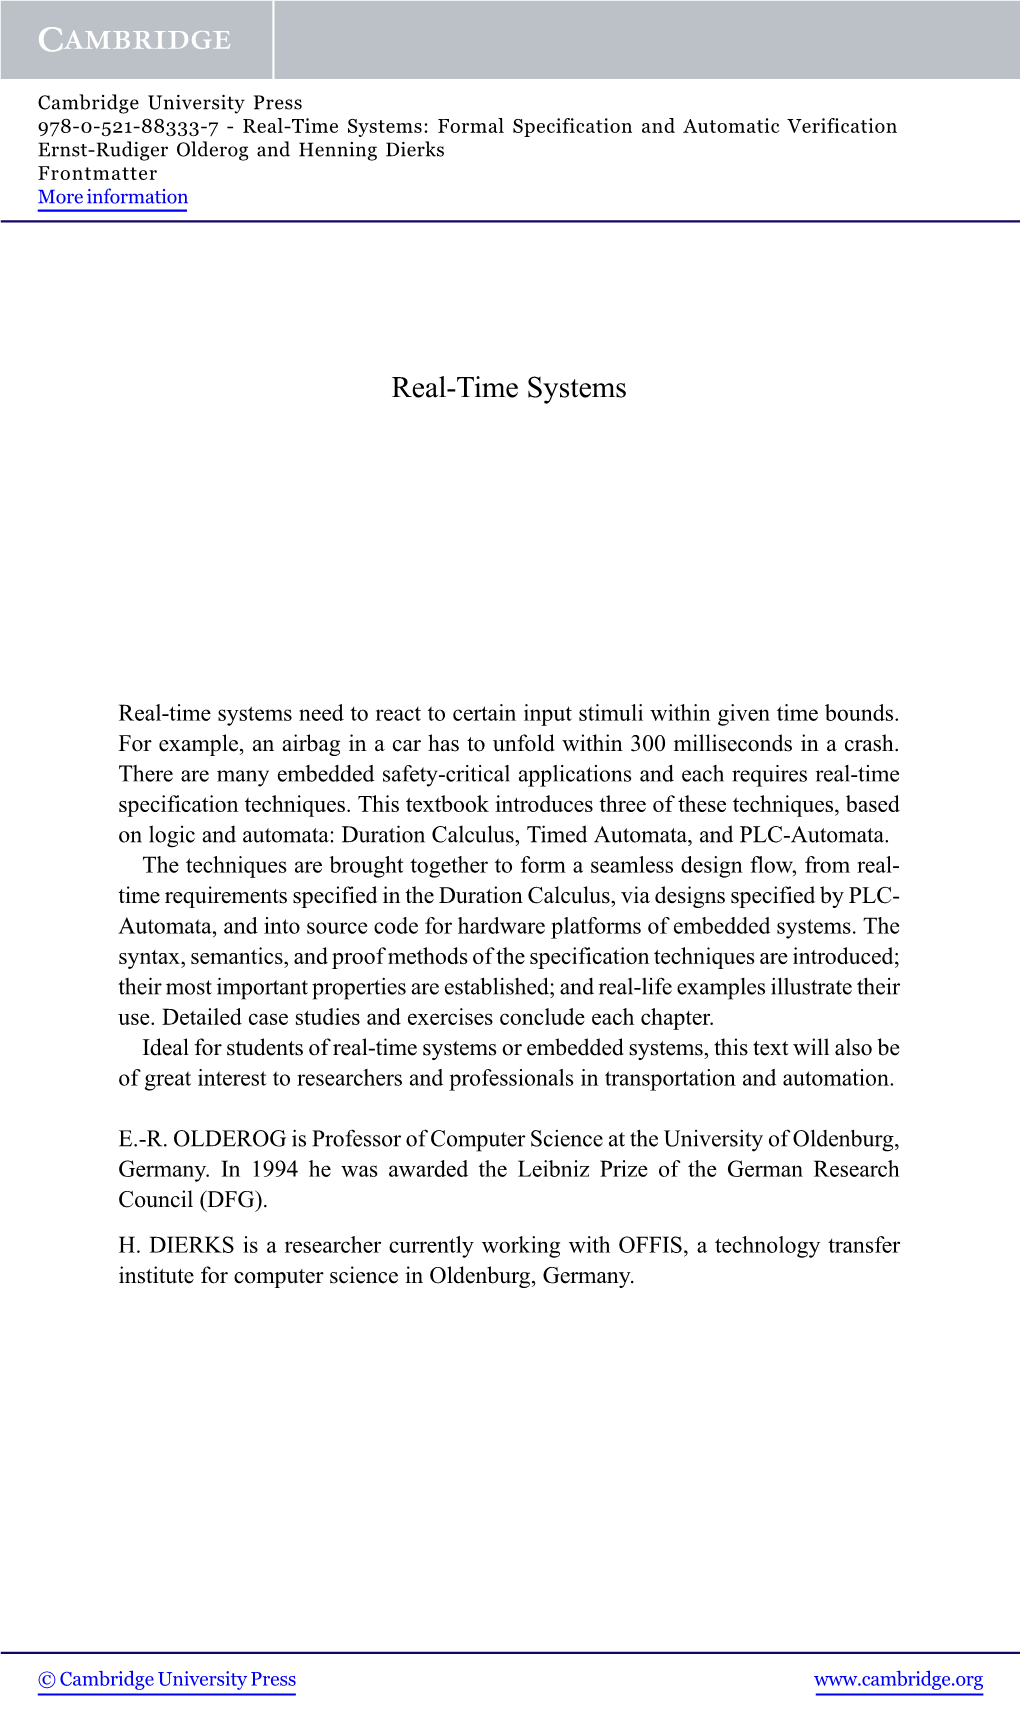 Real-Time Systems: Formal Specification and Automatic Verification Ernst-Rudiger Olderog and Henning Dierks Frontmatter More Information